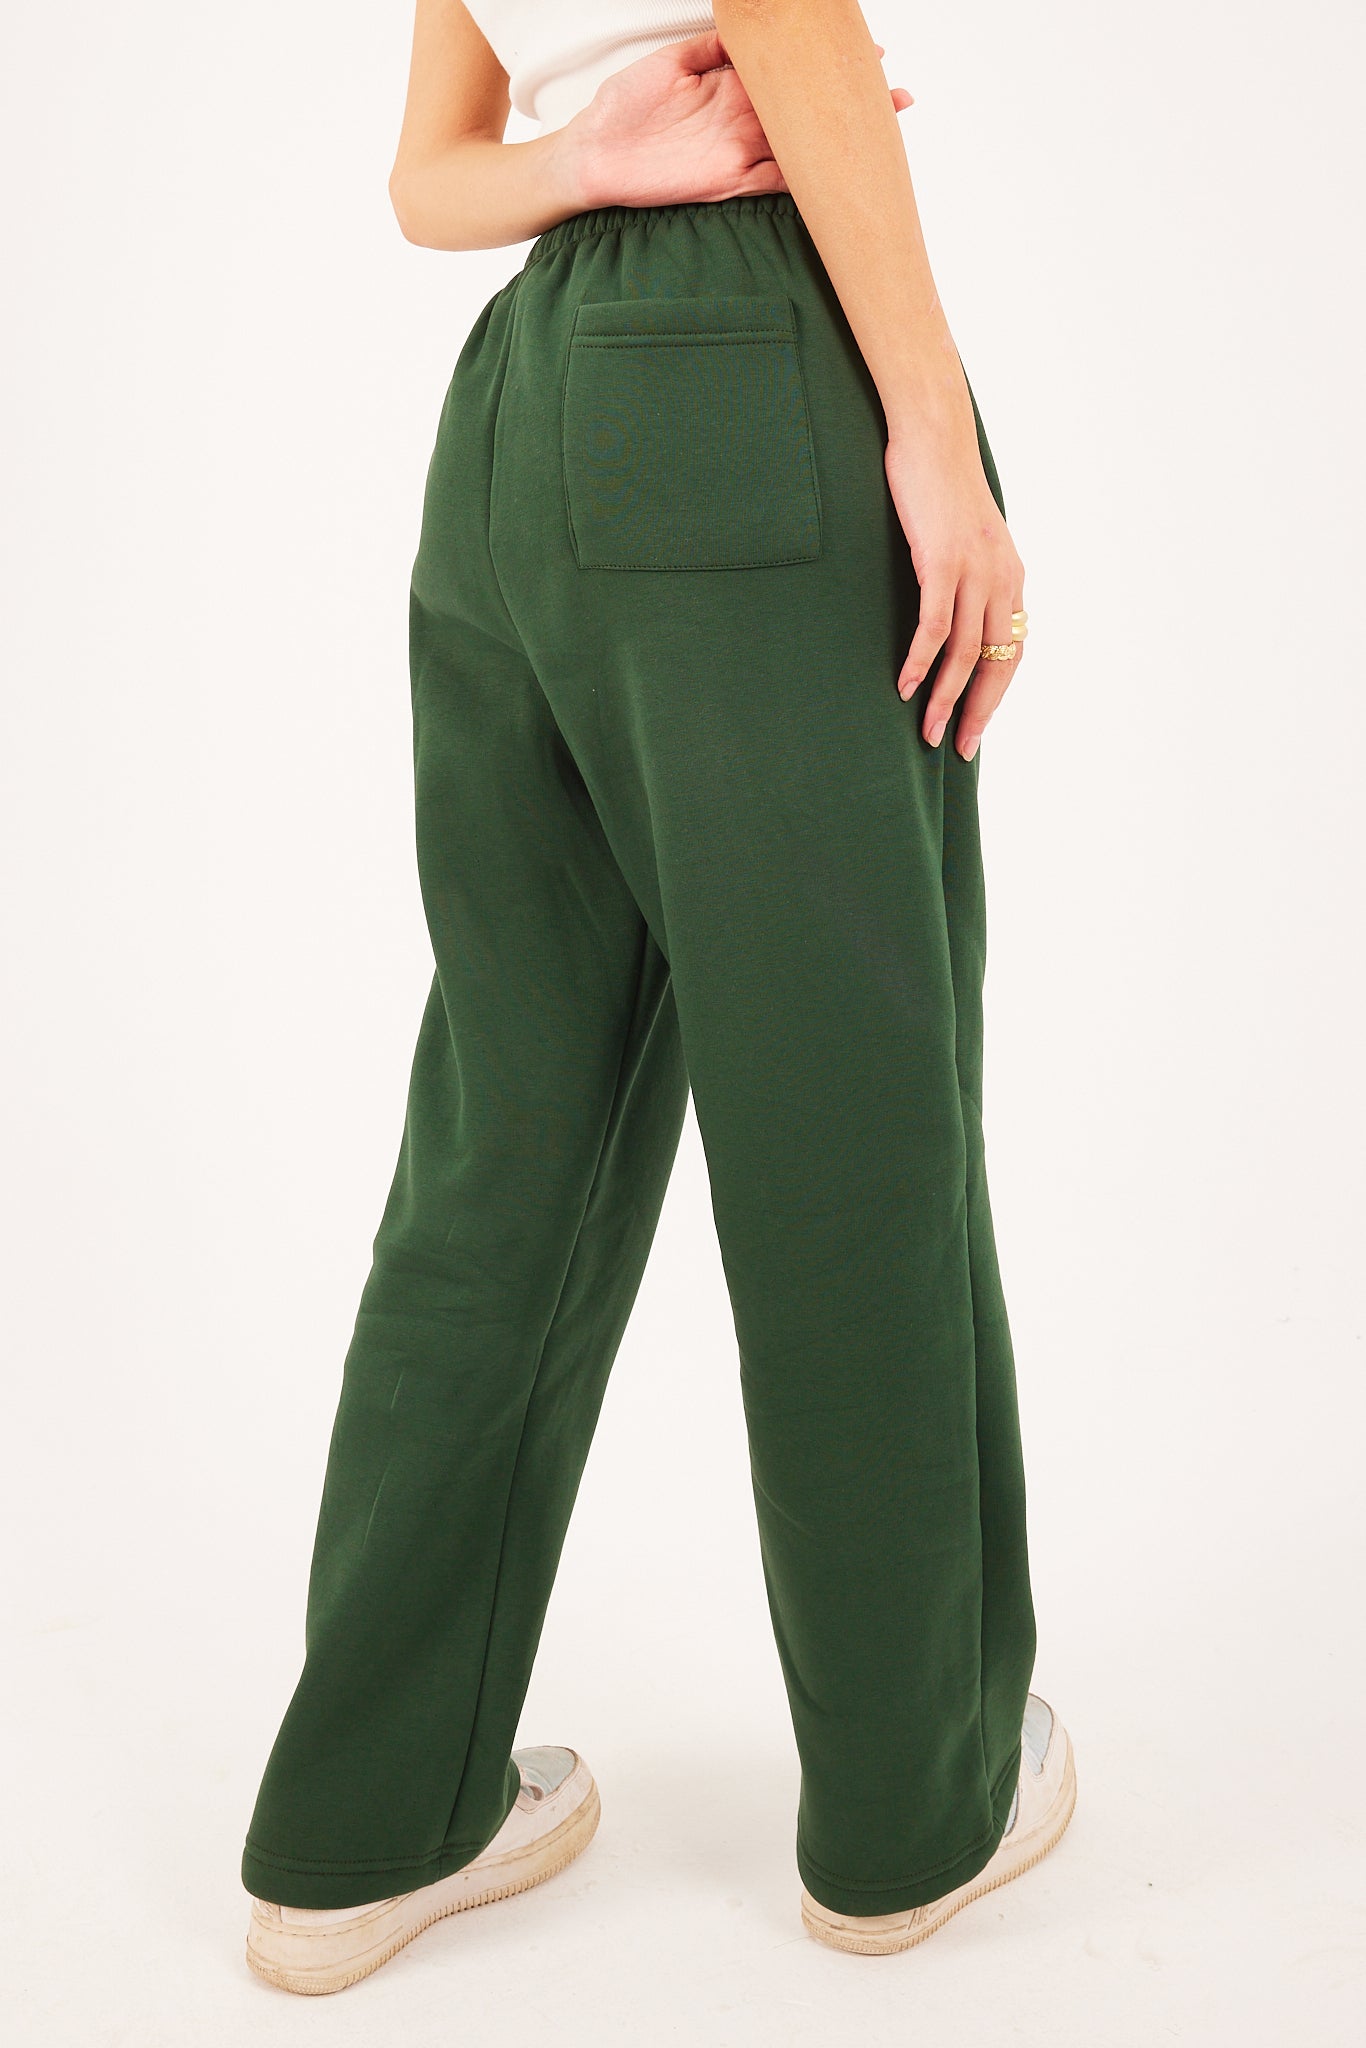 Collective Green Sweatpants